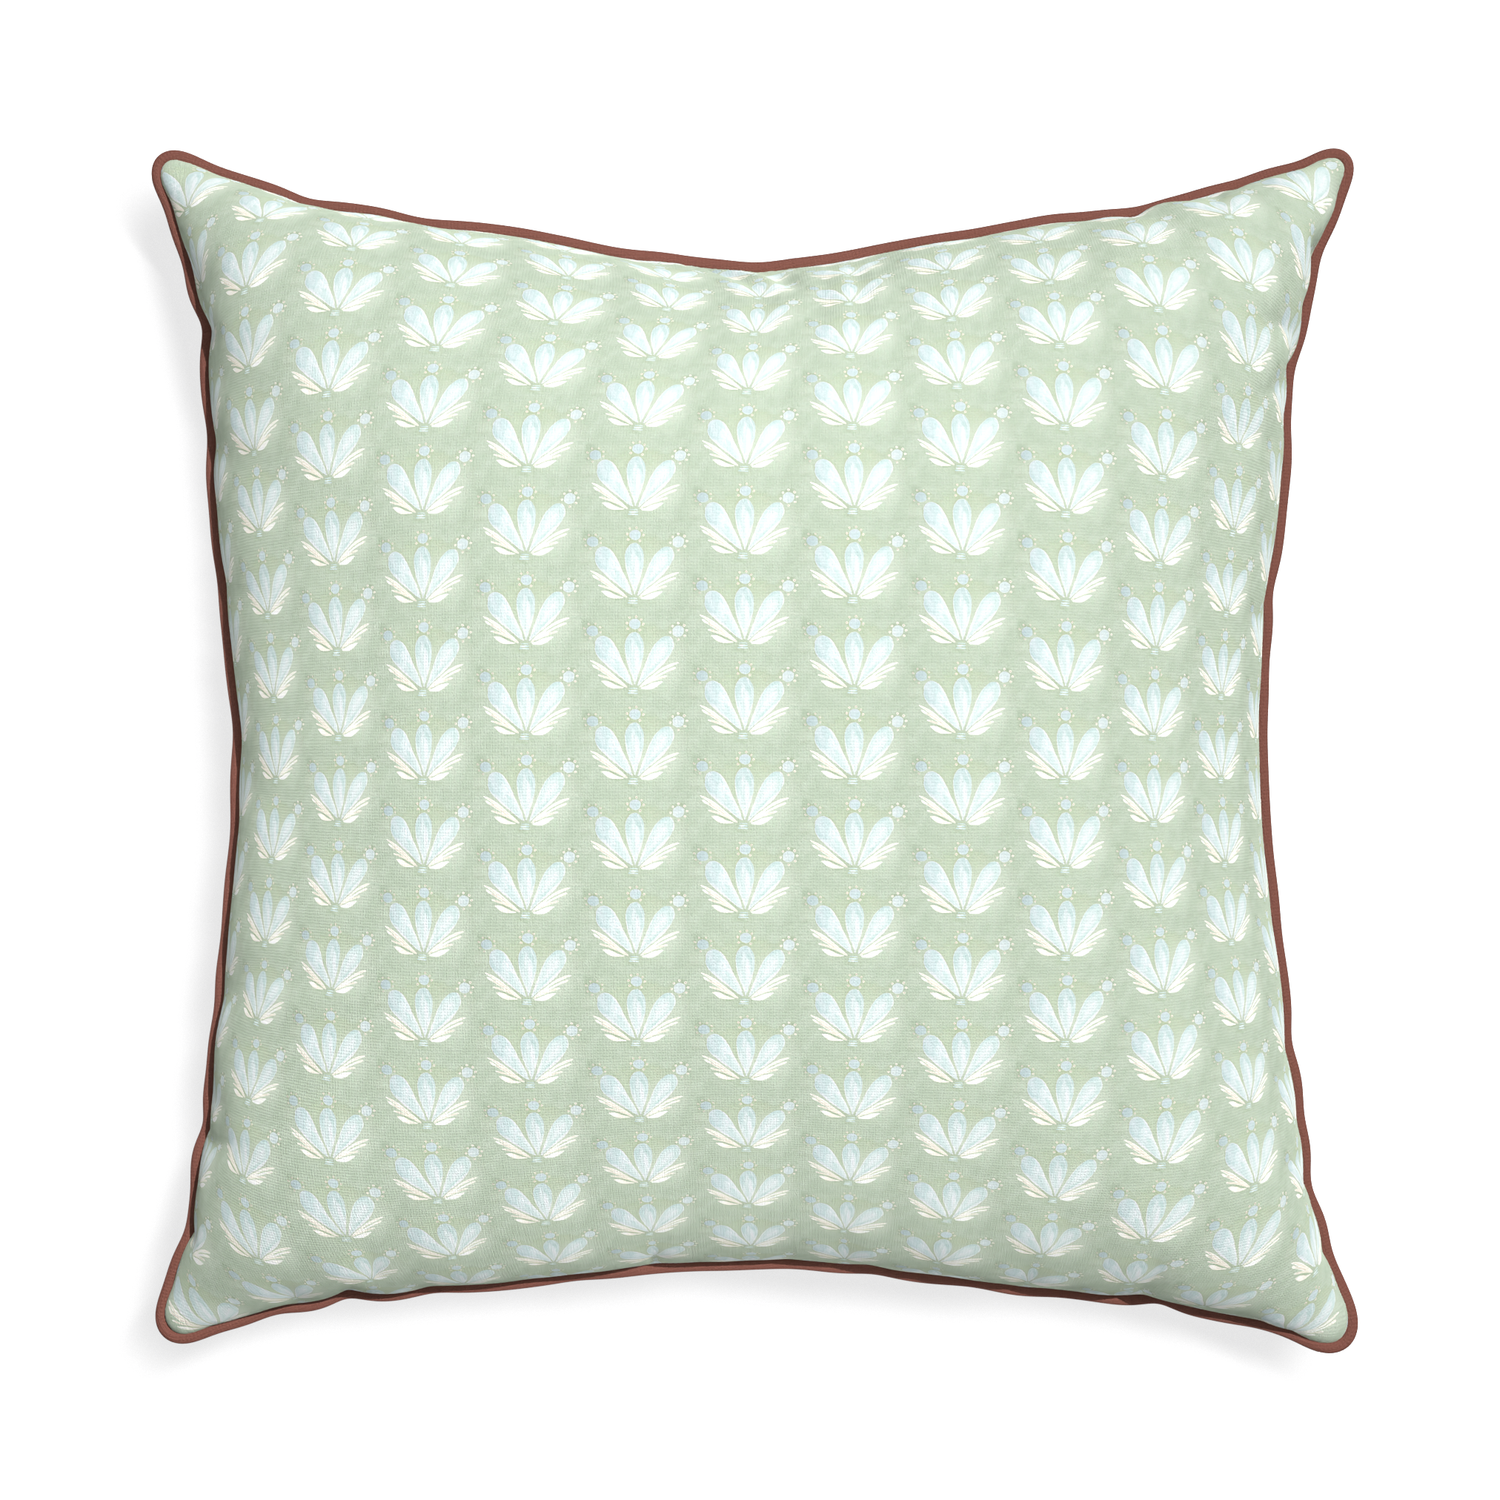 Euro-sham serena sea salt custom blue & green floral drop repeatpillow with w piping on white background